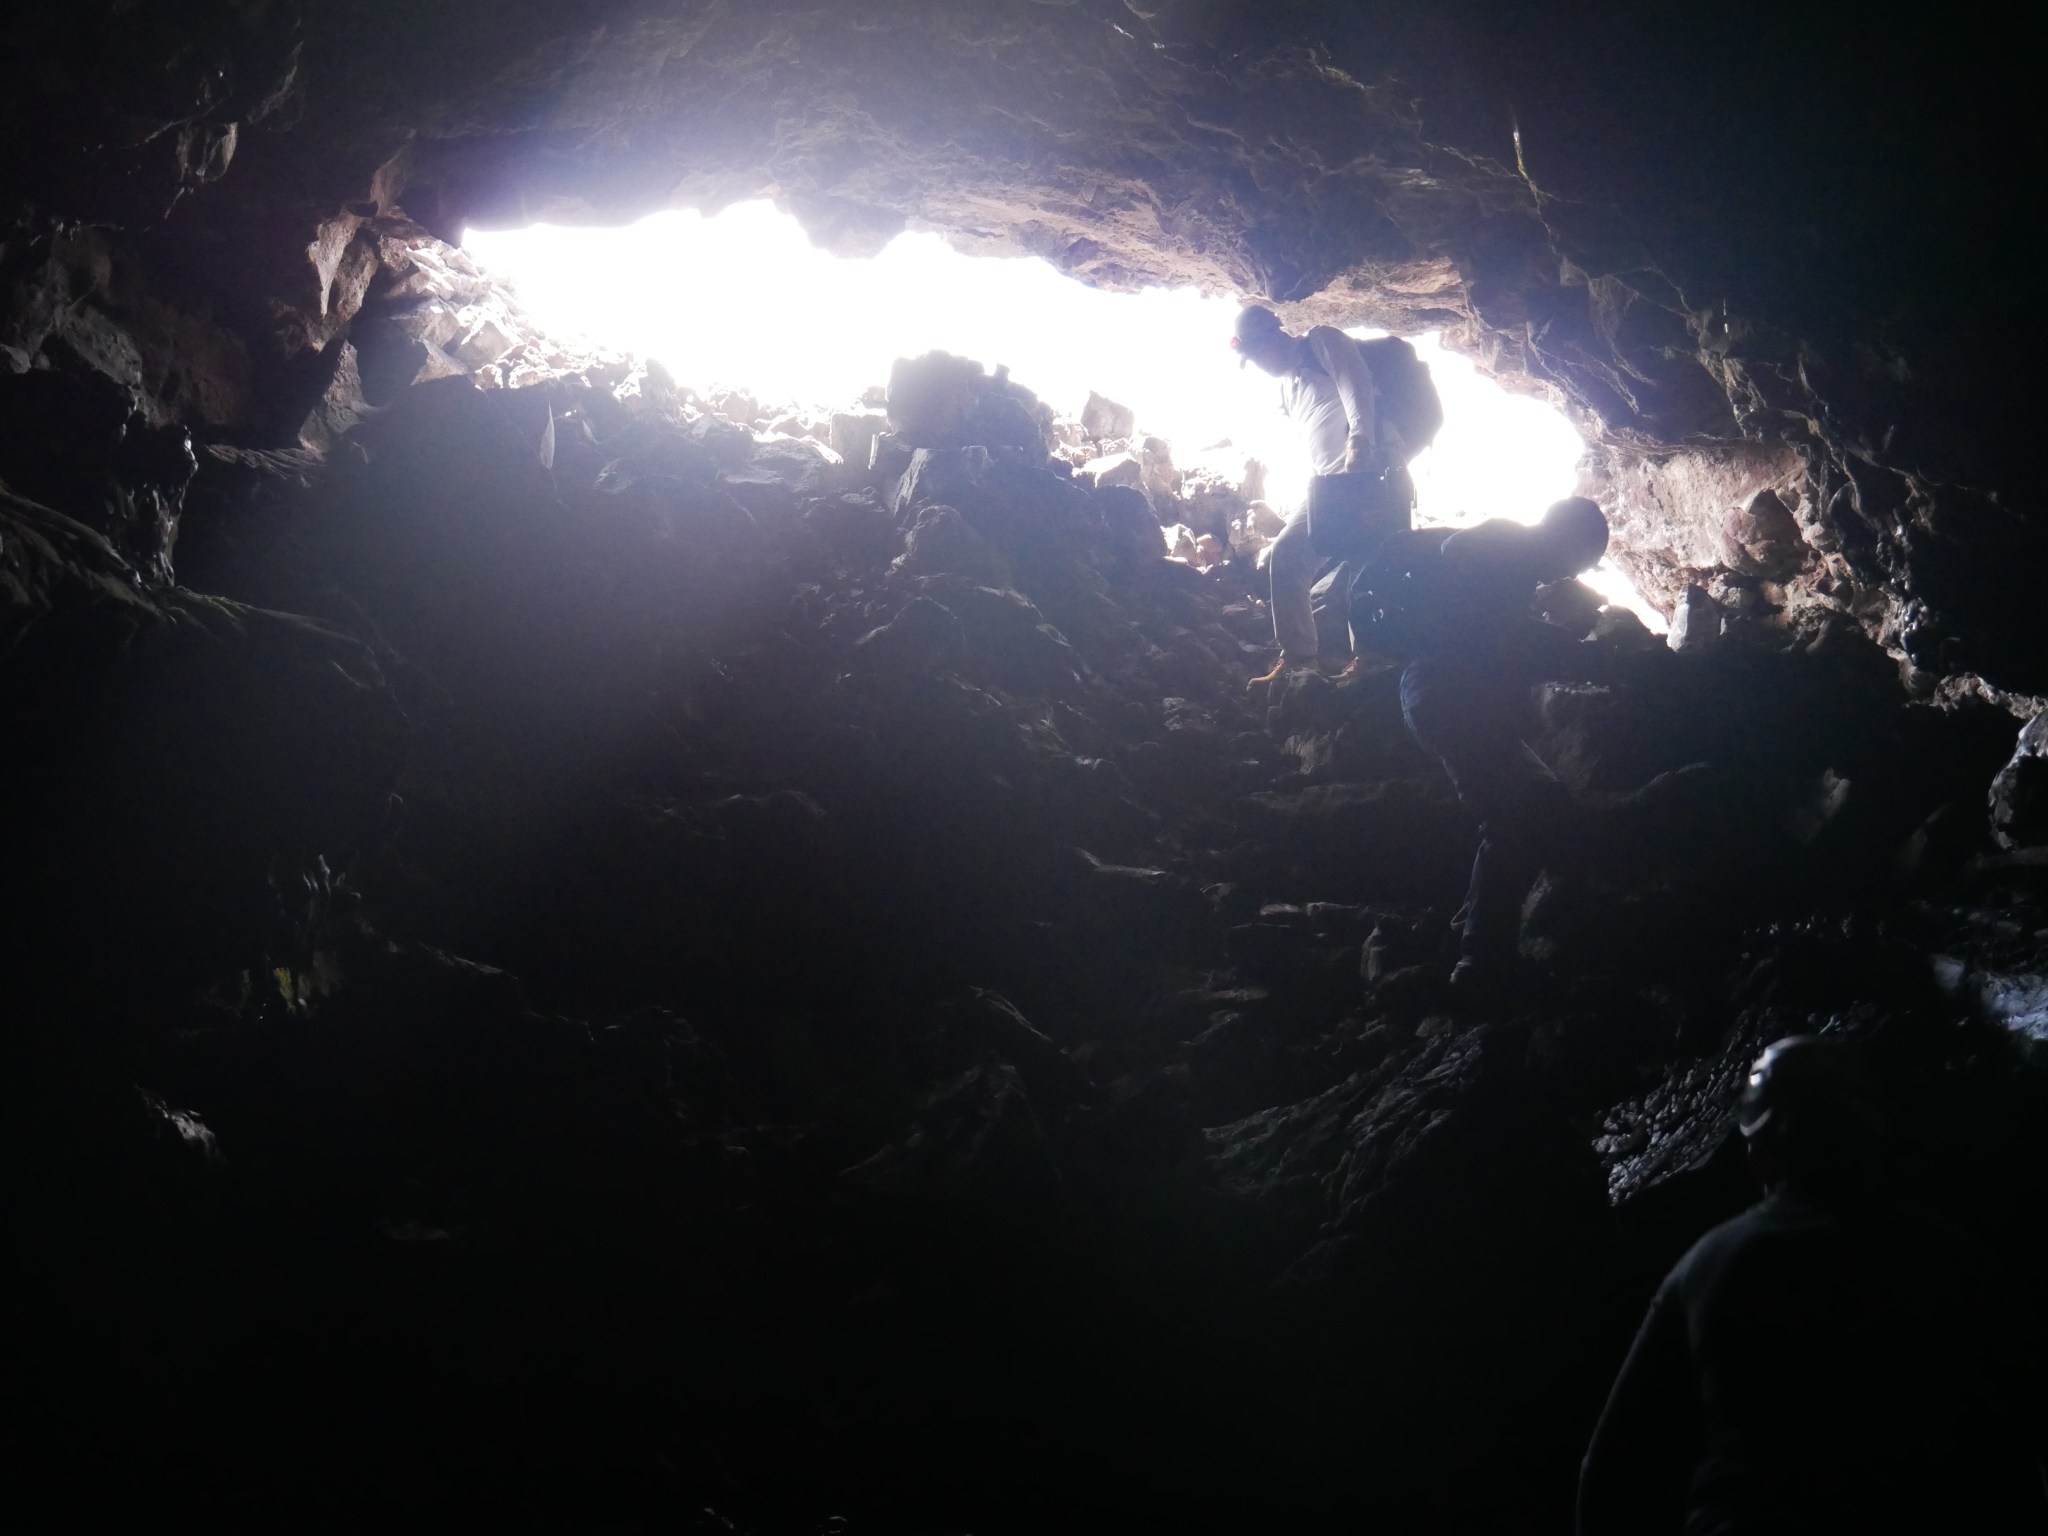 Image of scientists entering a lava tube cave.